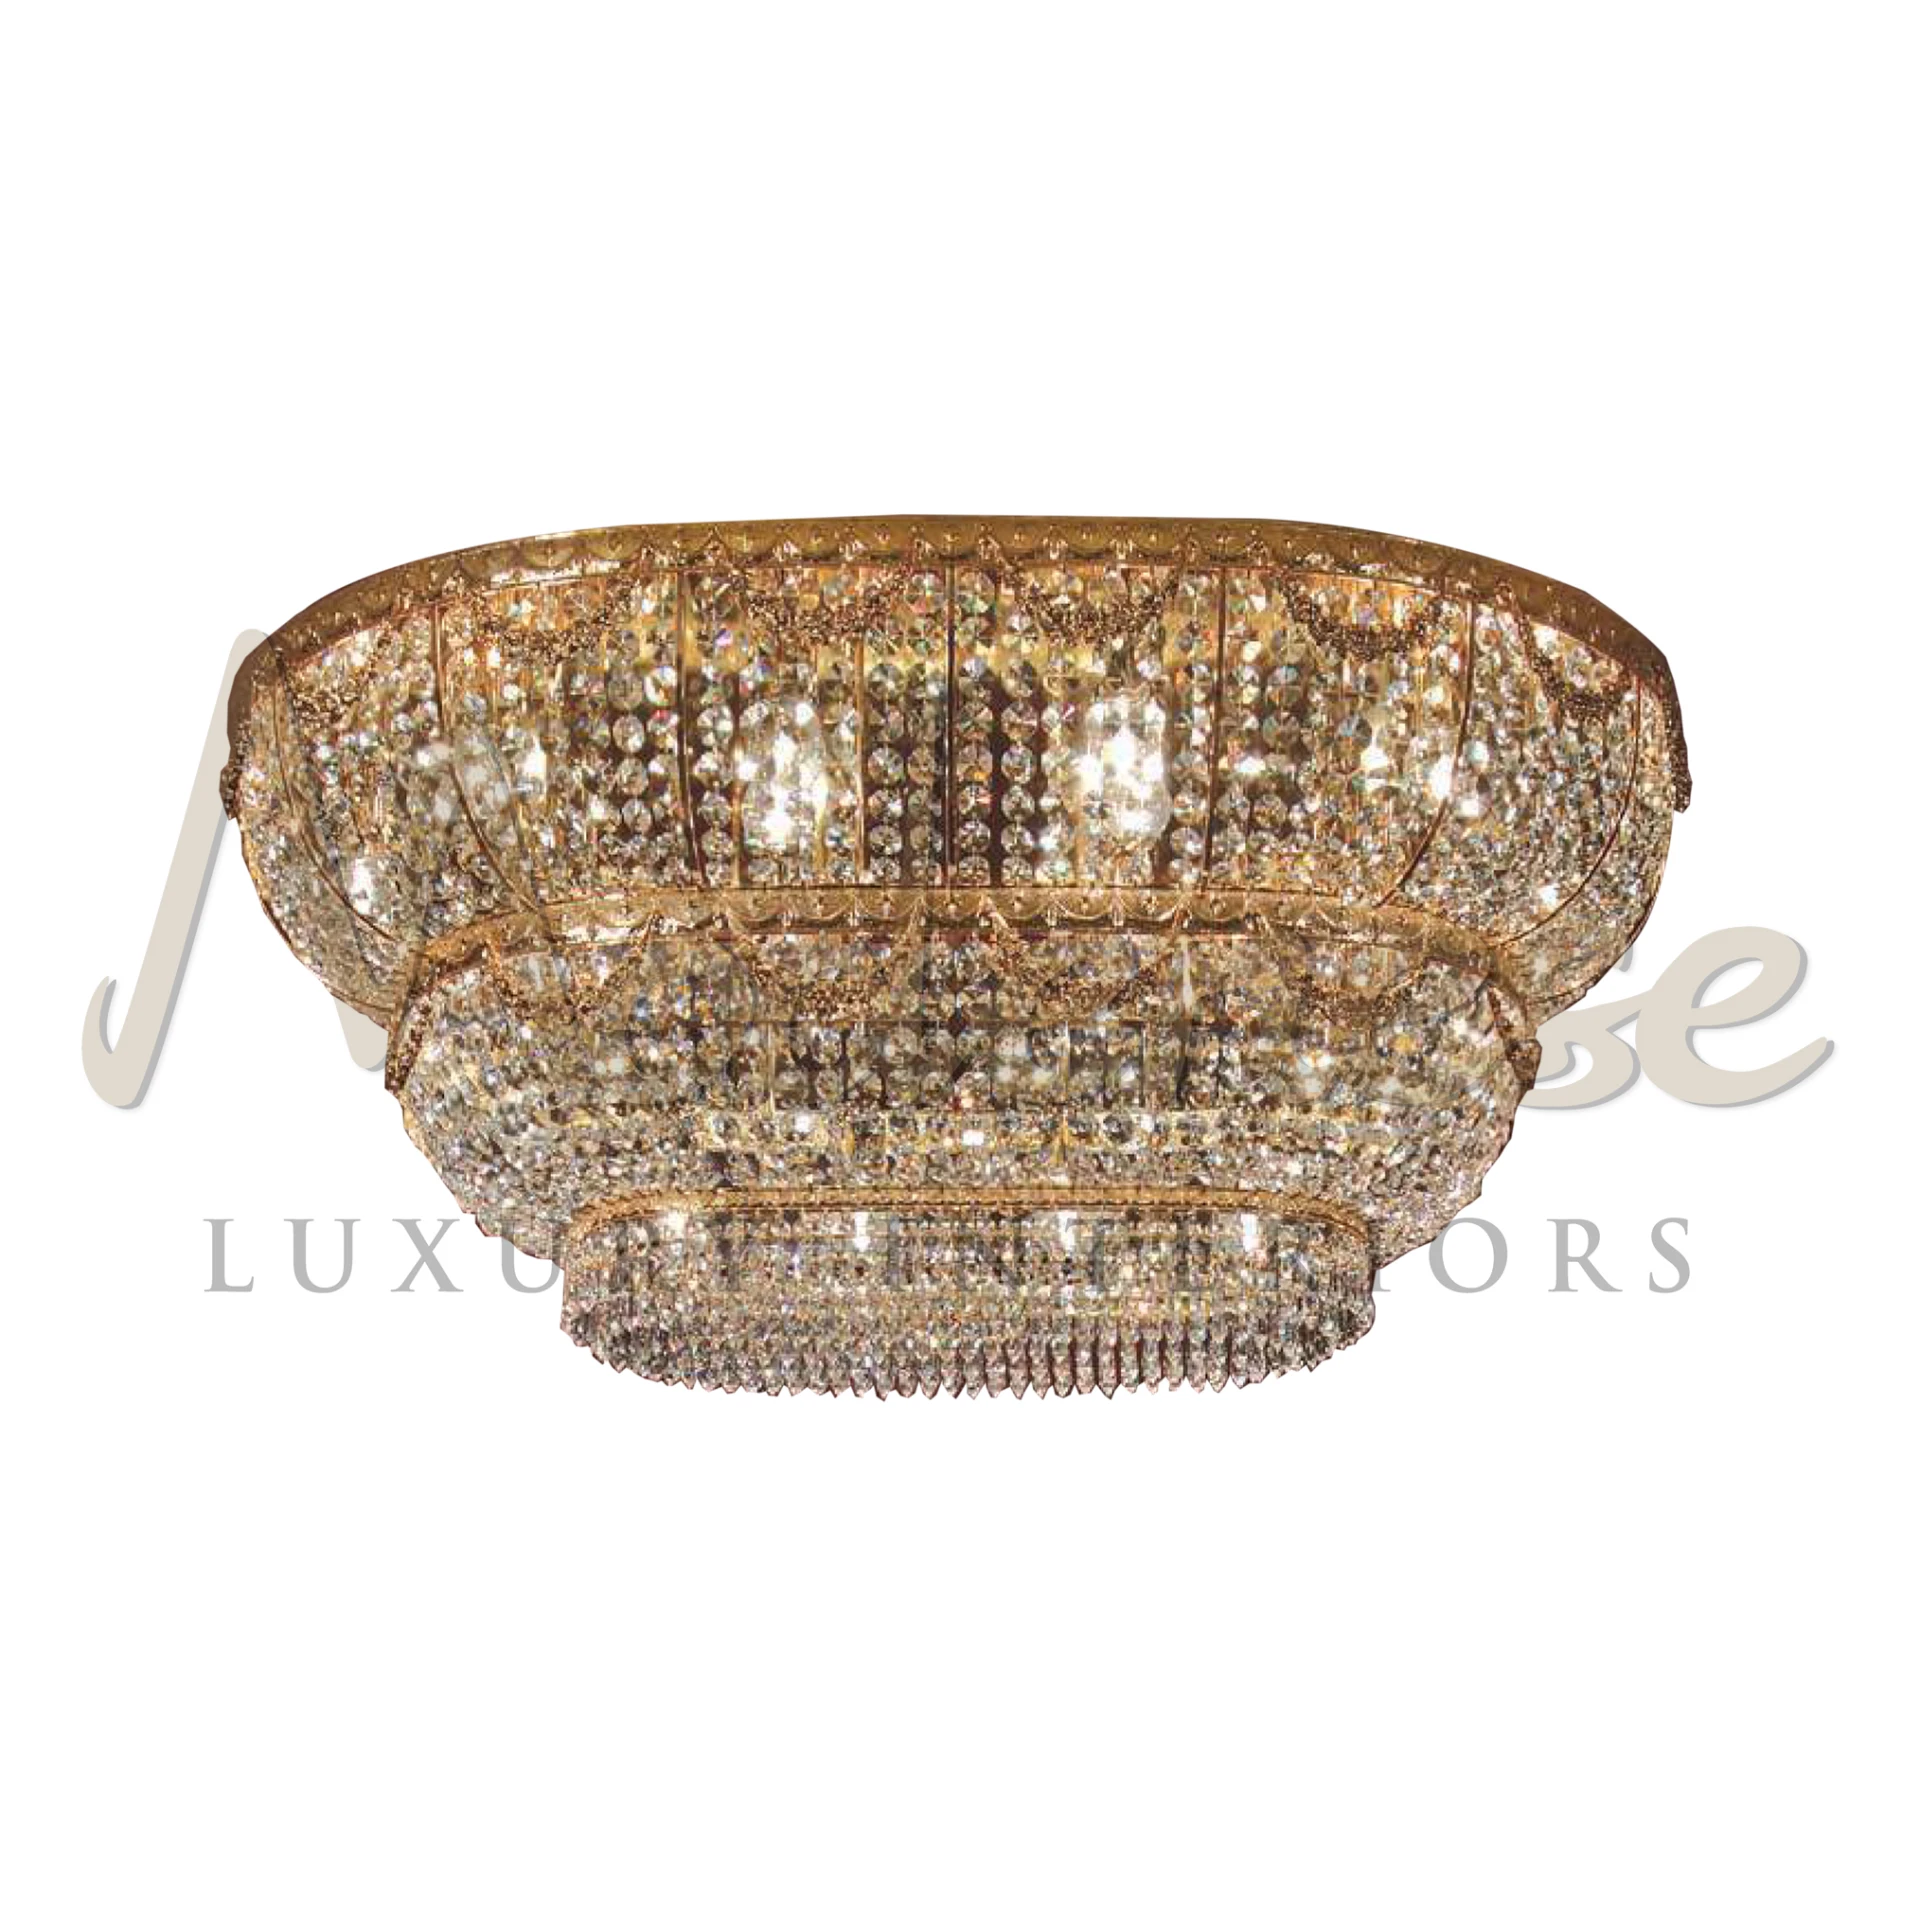 Finesse Ceiling Lamp decorated with sparkling crystals and a luxurious gold frame.